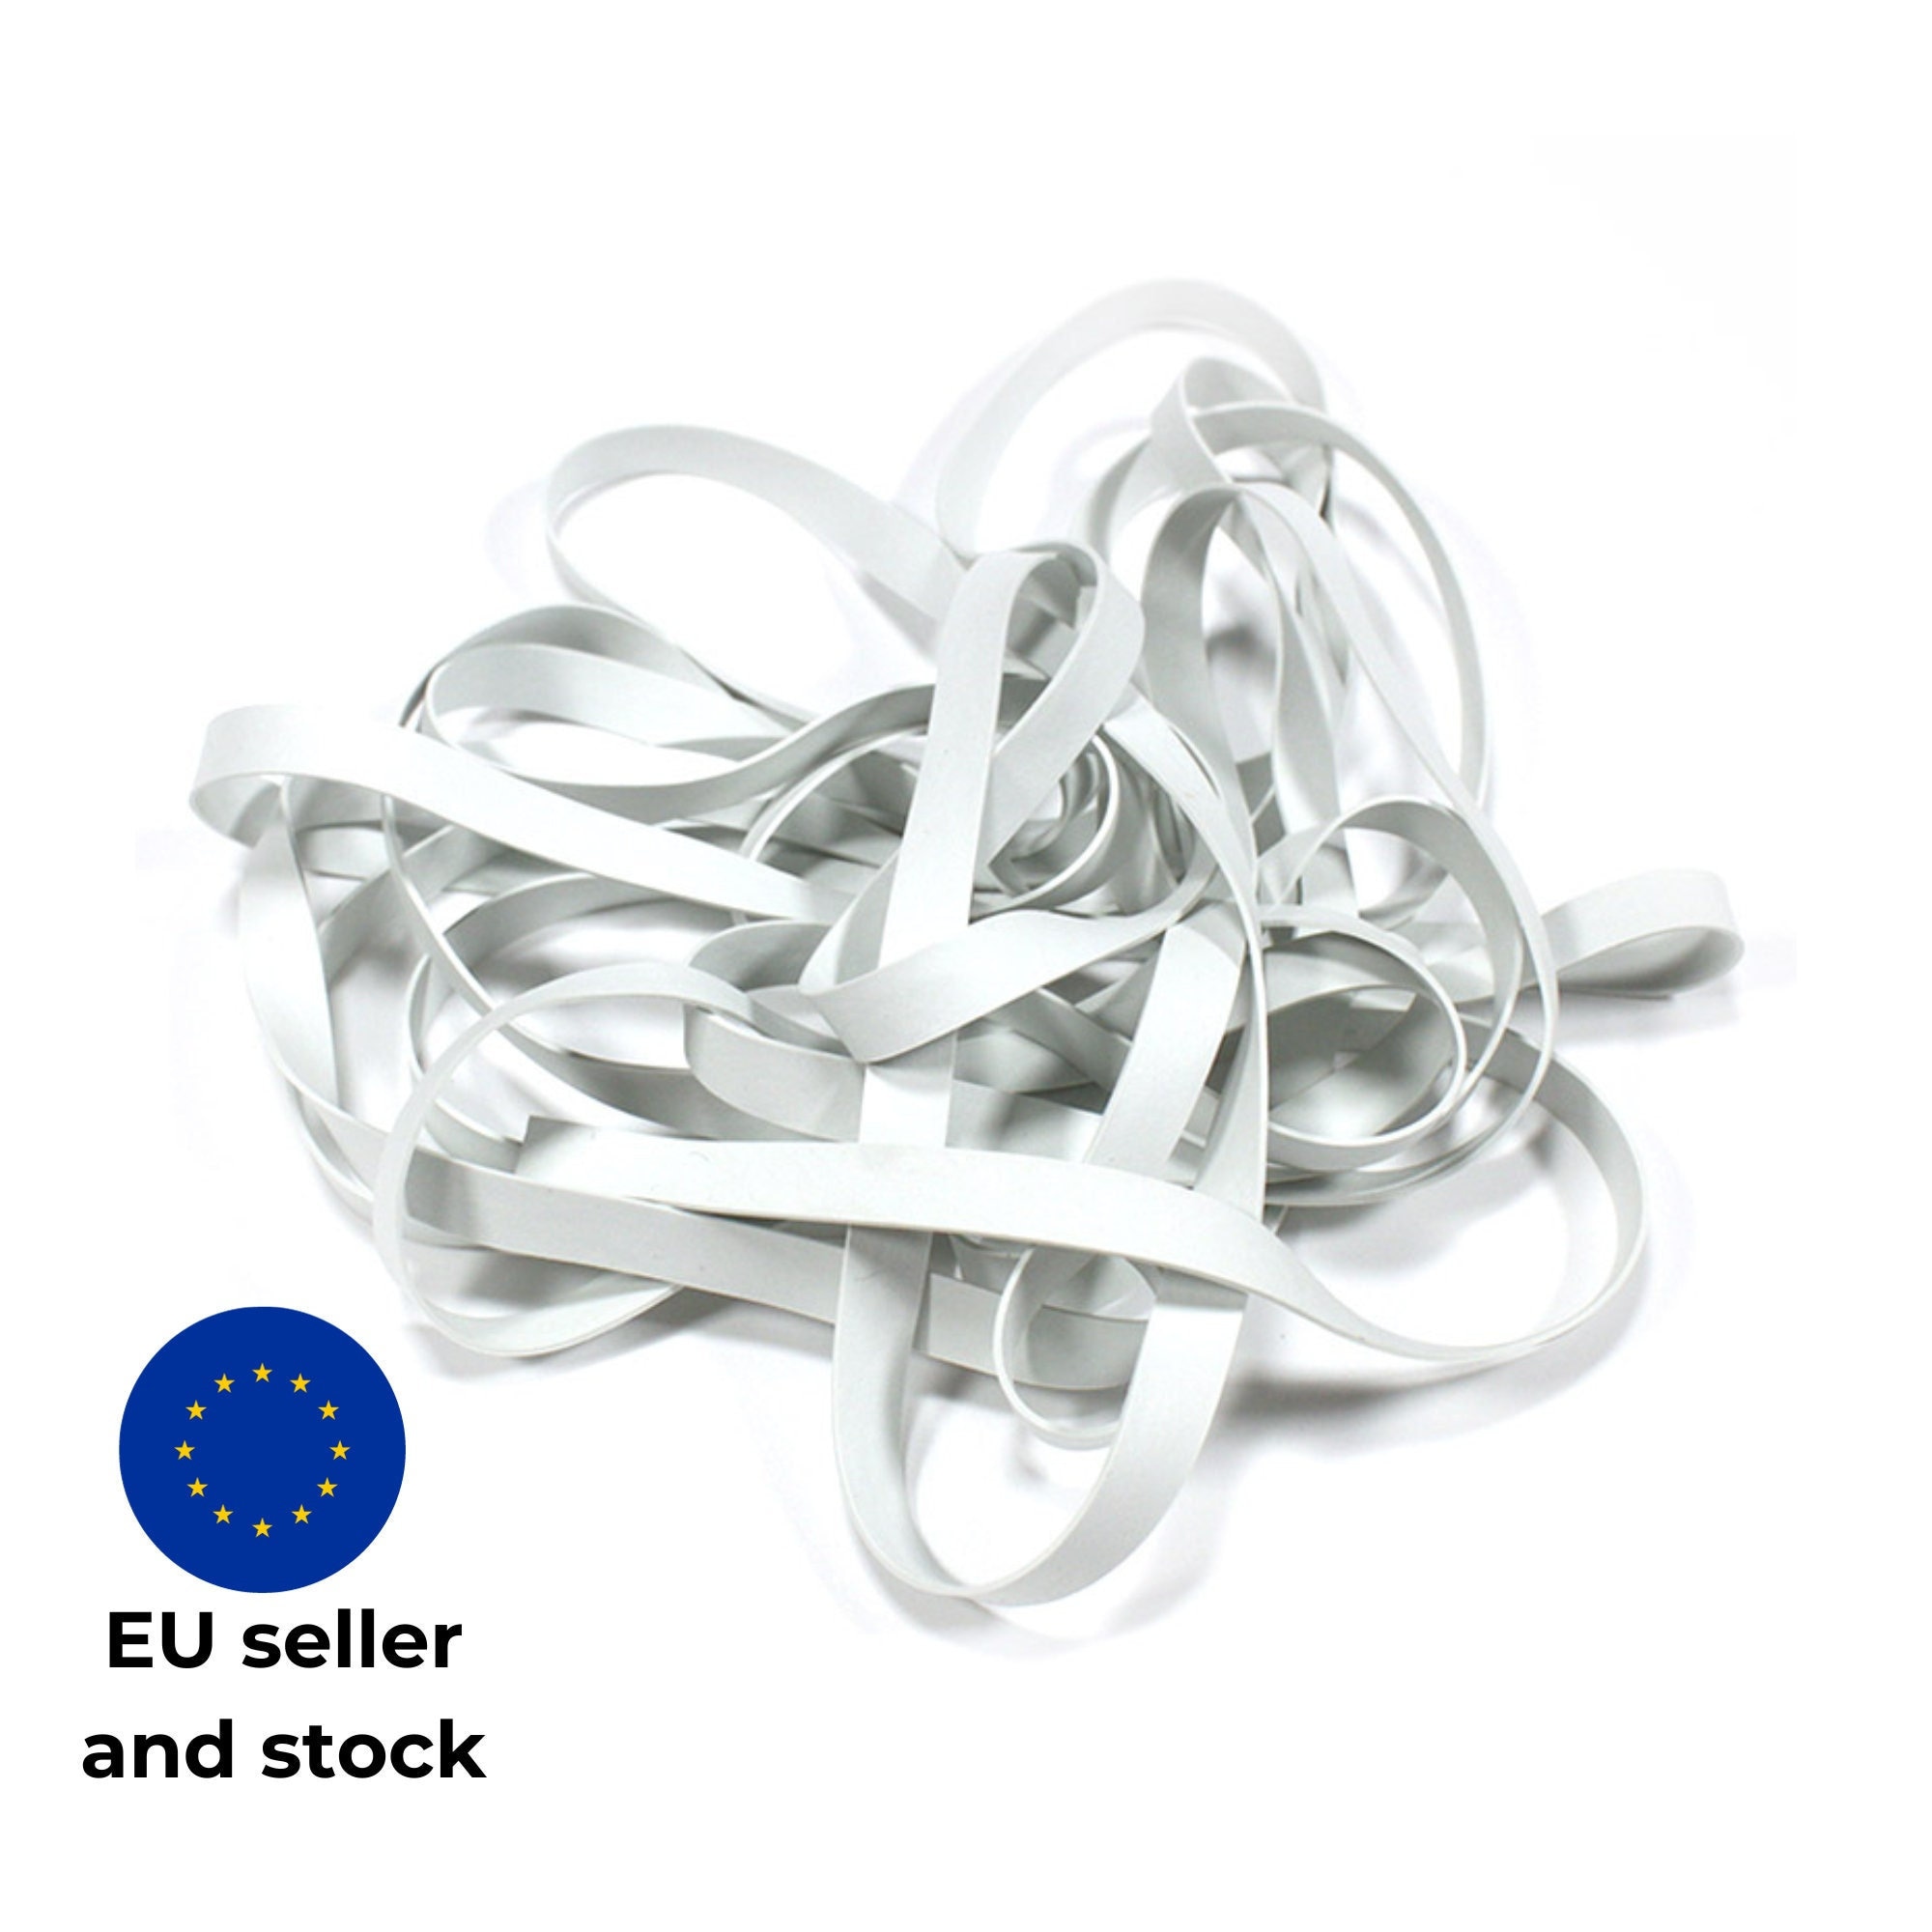 215-430 Natural Elastic Rubber Bands Size 18 Strong Stretchy 80mm x 1.5mm  Office